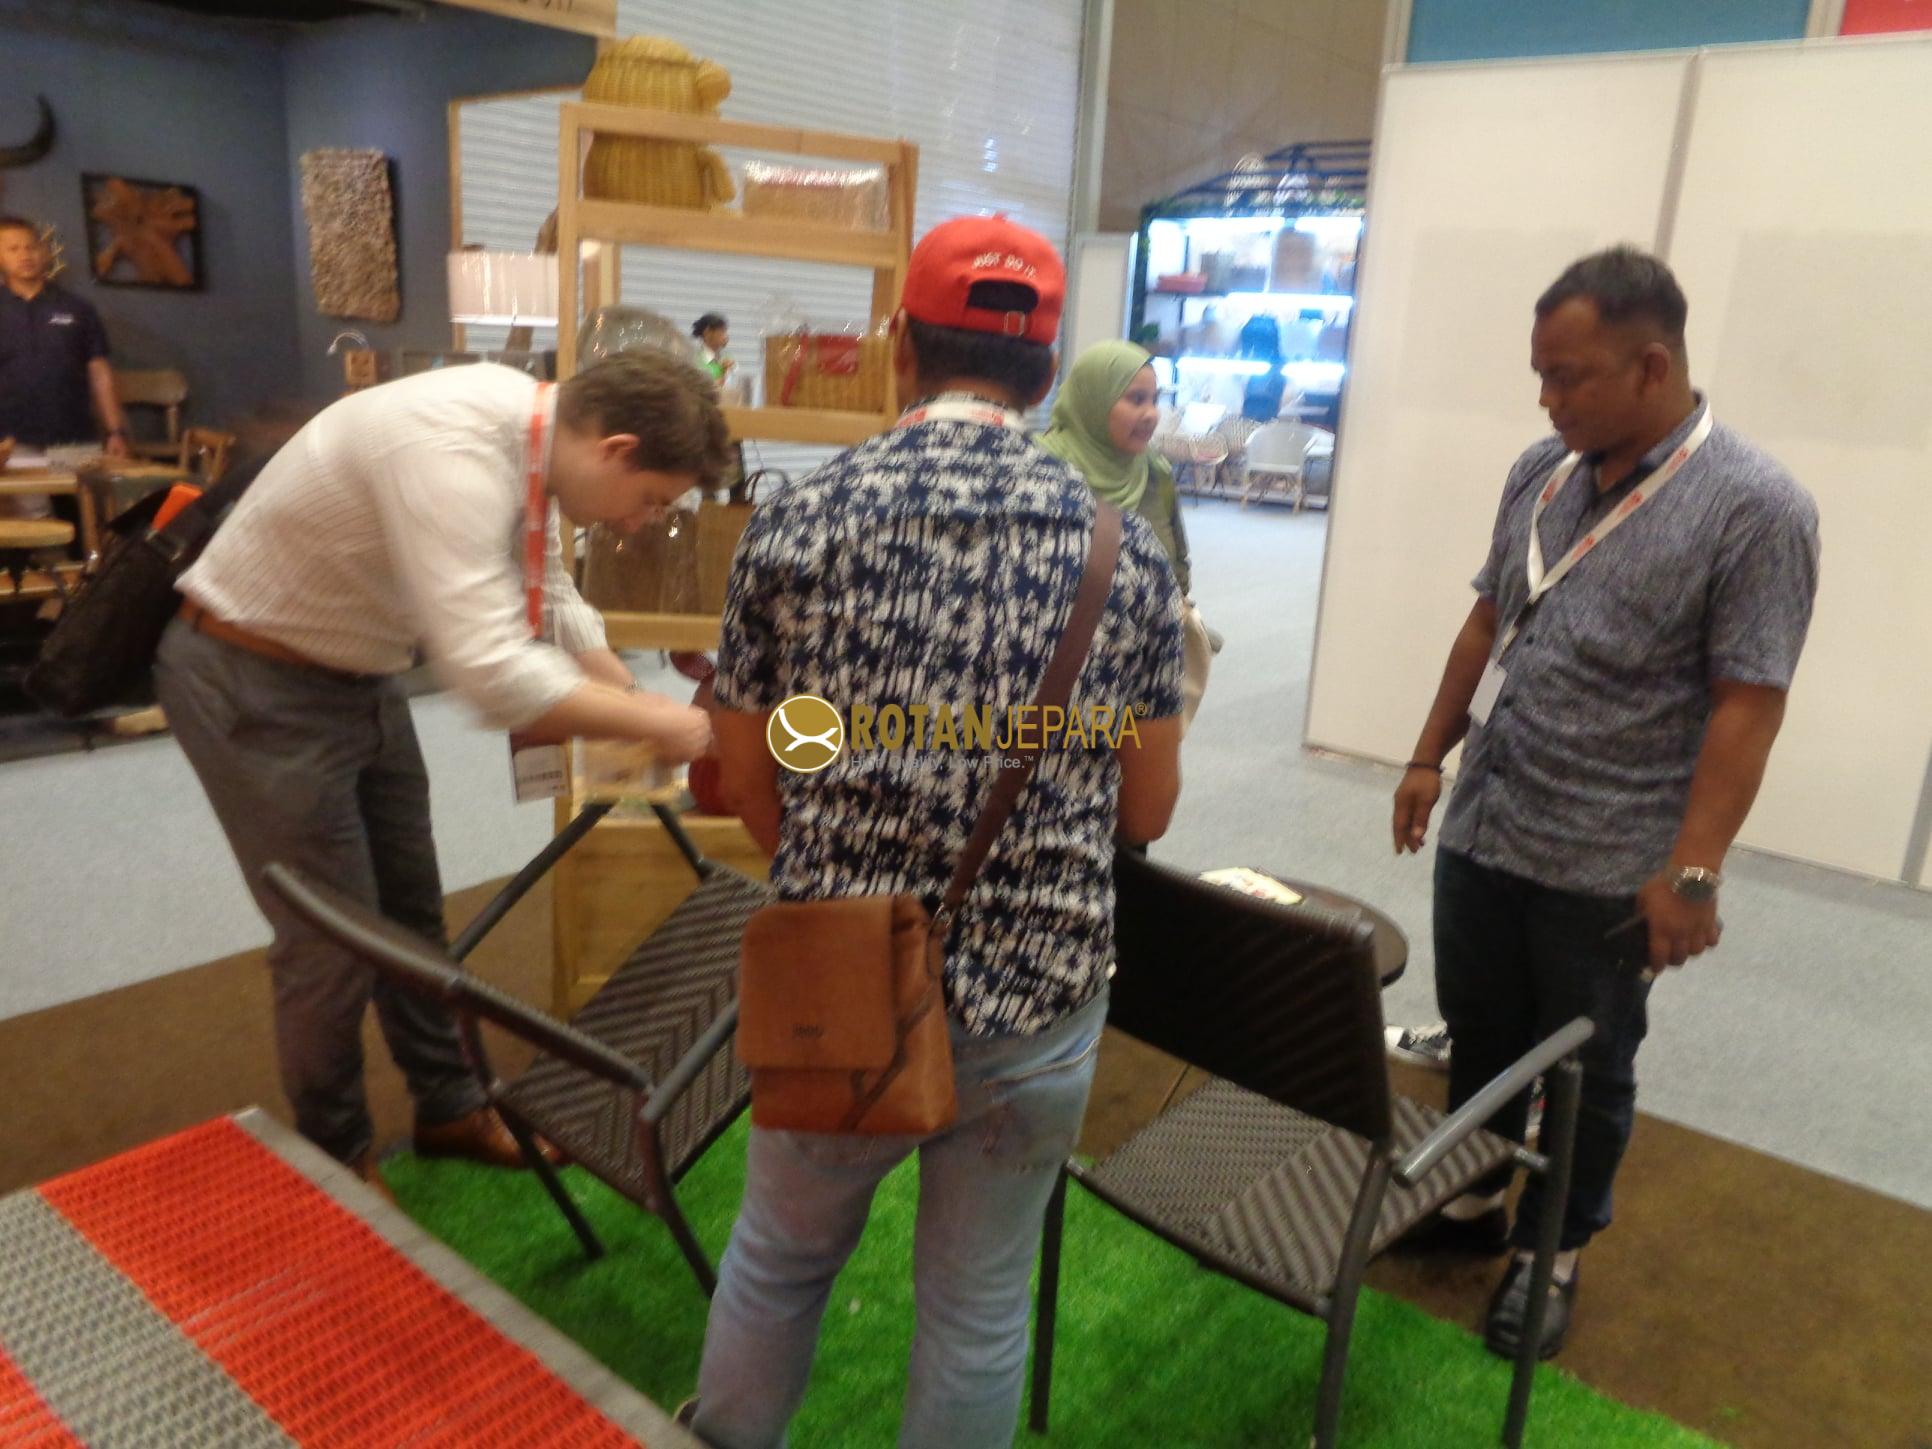 The largest furniture and handicraft exhibition in the region, this year's Indonesia International Furniture Expo (IFEX) was held differently. 